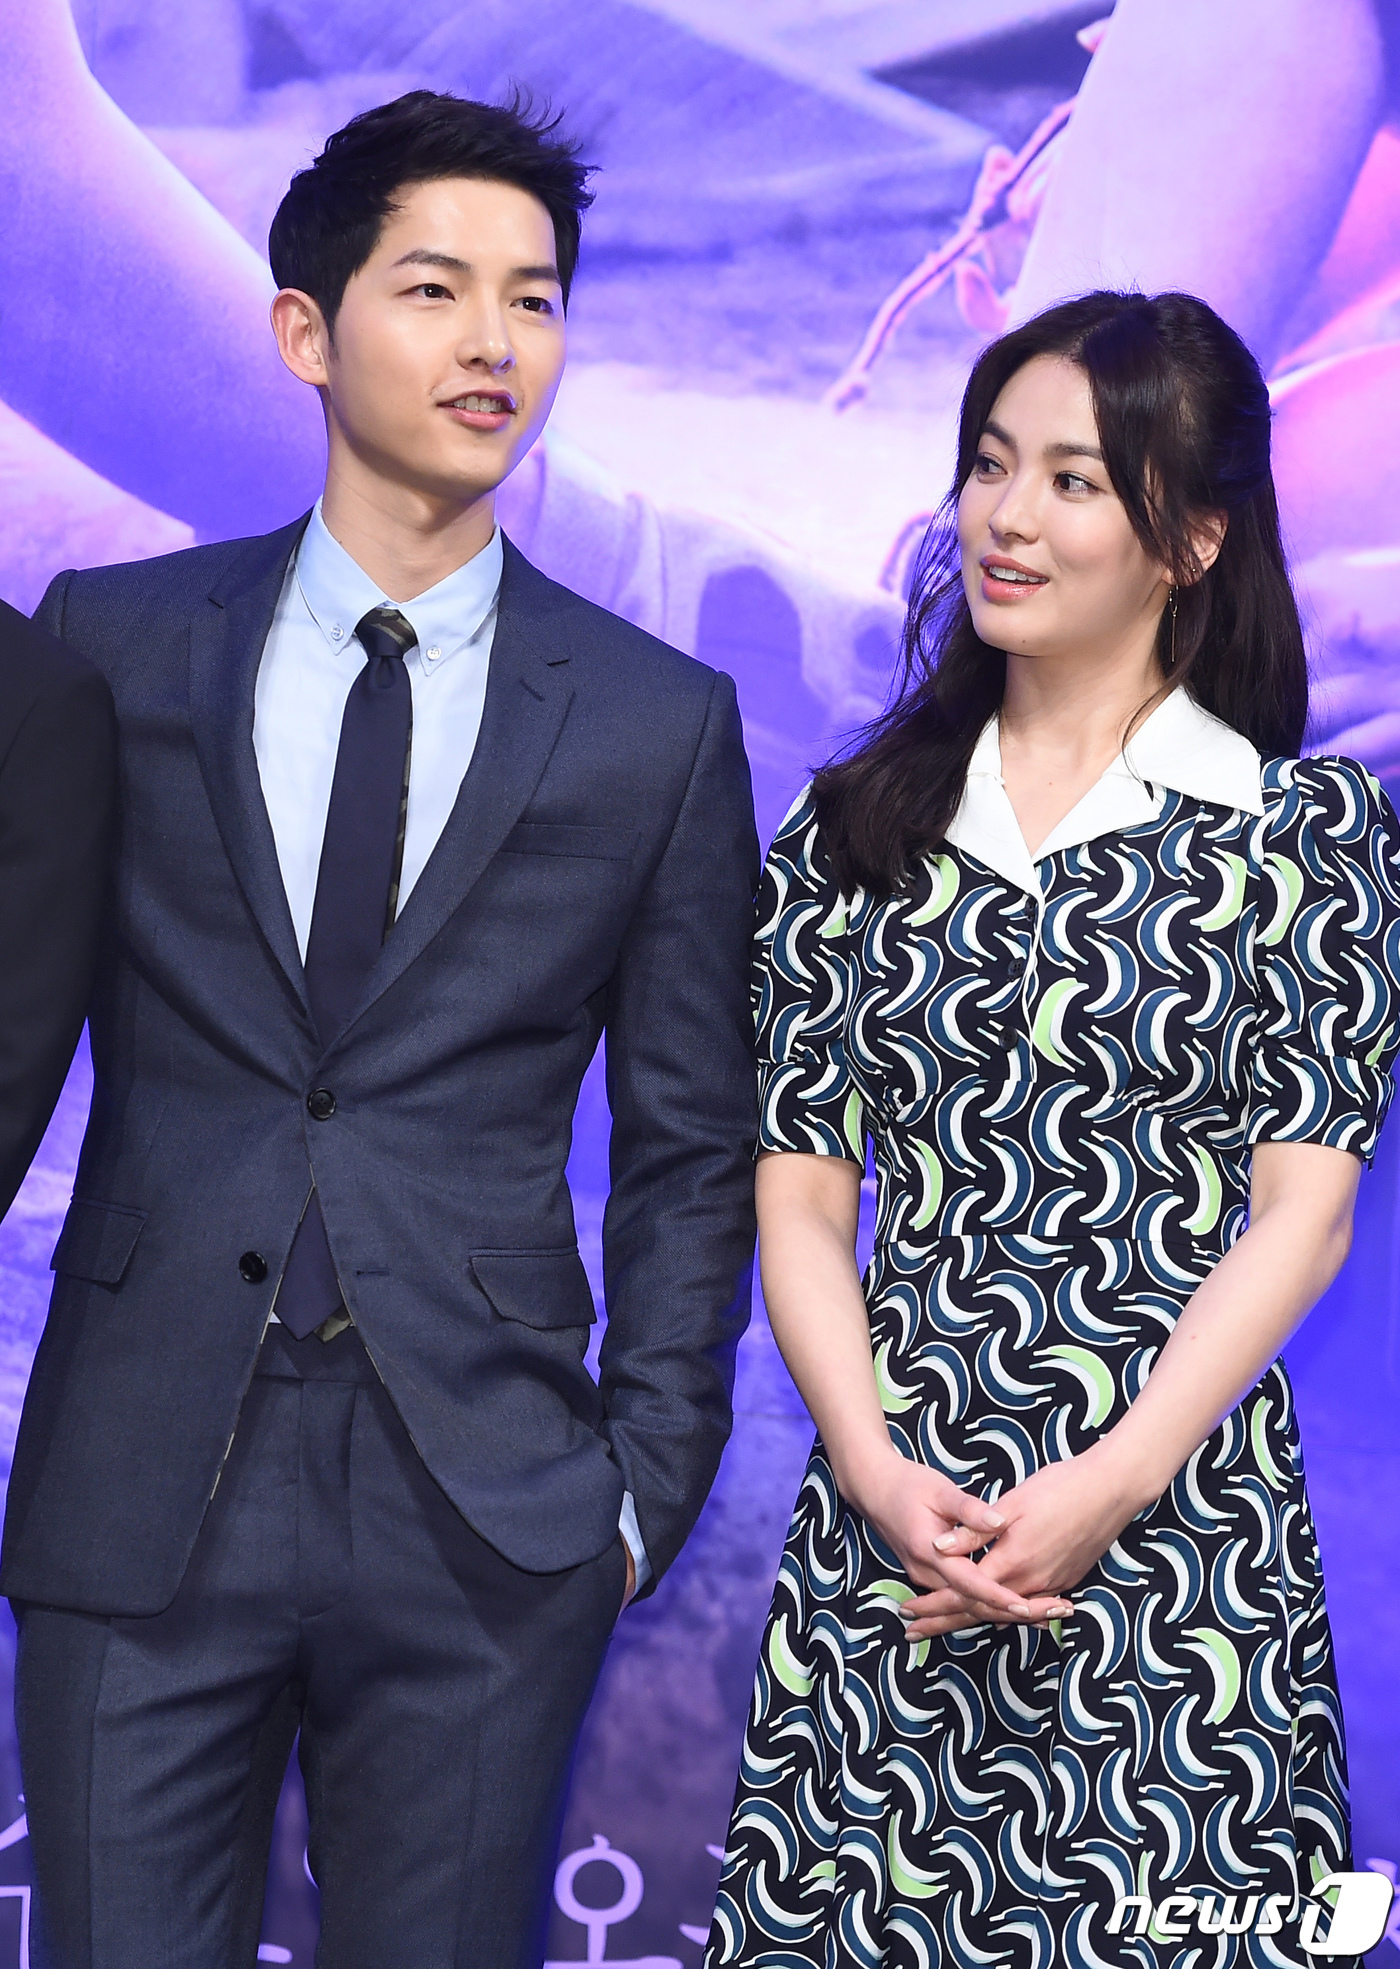 Seoul) = Actor Song Hye-kyo (38) and Song Joong-ki (34) have decided to part ways. The two sides agreed to divorce and left only procedures.On the 27th, Song Joong-kis agency Blossom Entertainment said, Song Joong-ki Song Hye-kyo decided to finish his marriage after careful consideration and is in the process of divorce after amicable agreement.Song Hye-kyos agency, UAA Korea, also made an official position and said, Song Hye-kyo is in the process of divorce after careful consideration with her husband. The reason is that the two sides can not overcome the difference between the two sides. Song Hye-kyo and Song Joong-ki made a relationship with KBS 2TV drama Dawn of the Sun which was broadcast in 2016, and developed into a lover that year.In the meantime, the pair denied it even if rumors of an outpouring of romance broke out, but announced the surprise wedding news in July 2017 at the same time as they admitted to devotion.The two men, who married in October, were attracted attention both in Korea and abroad as a couple of the century.However, since last year, Song Hye-kyo has not been wearing a The Wedding Ring in the official ceremony, and the two people have been dissatisfied.After that, Song Joong-ki appeared on the TVN Asdal Chronicles script reading scene with a The Wedding Ring, and the dispute ended, but soon after the divorce news of the two people was announced,When they finished their marriage, the netizens said they were sorry, but there were also rumors that were not confirmed around their divorce.However, the two sides seem to do not want to create unnecessary controversy, and they are not making any special comments on this.Song Hye-kyos legal representative said, Song Hye-kyo and Song Joong-ki agreed to divorce, and accordingly they have filed a divorce settlement application with the Seoul Family Court for the divorce process. The two sides have already agreed on divorce, He said.Song Joong-ki and Song Hye-kyo, who had been attracting attention since their devotion to the entertainment industry hot couple, could not overcome the gap caused by character difference and ended their marriage in less than two years.The two are concentrating on a quiet and smooth finish after the agreement is over.Meanwhile, the two are working hard to forget the pain of divorce. Song Joong-ki is currently appearing on TVN Asdal Chronicle, and Song Hye-kyo is positively reviewing the movie Anna.